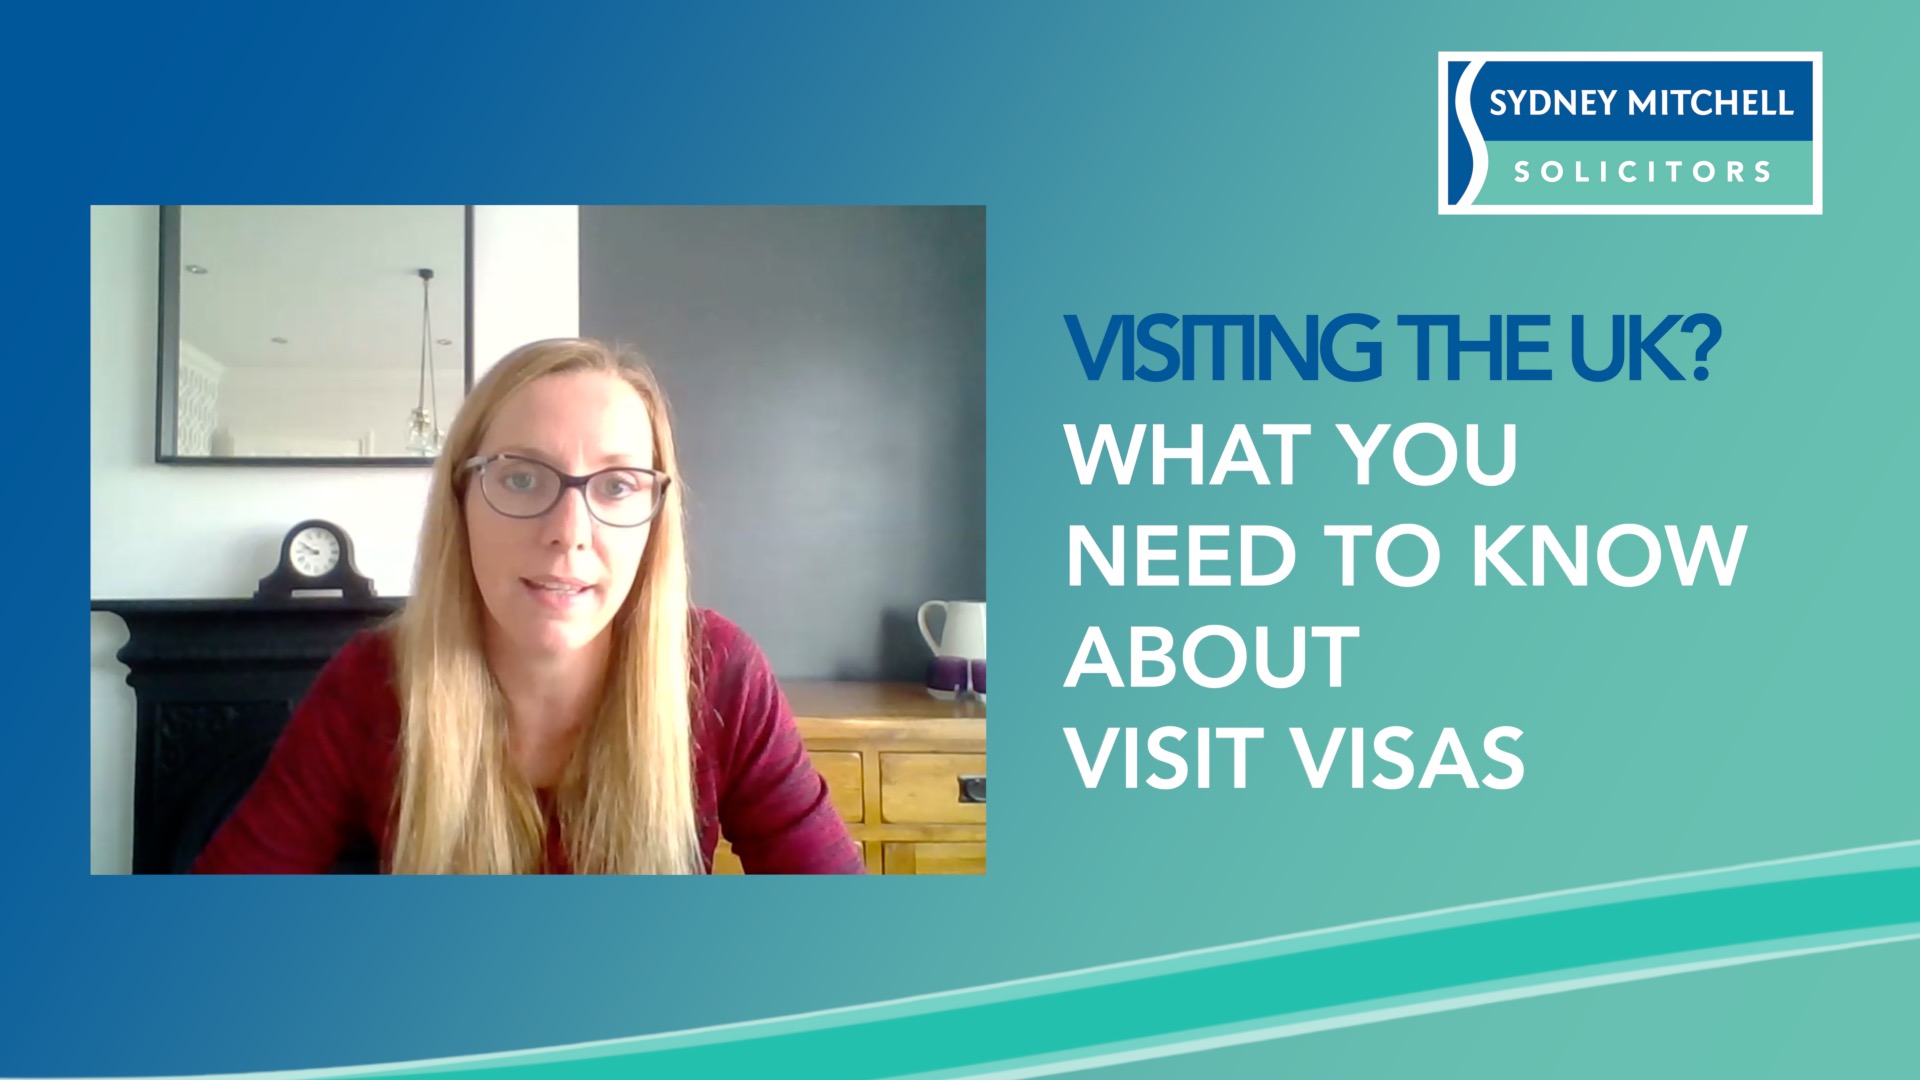 Visit Visas to the UK, Melissa Southall, Immigration Law Solicitor